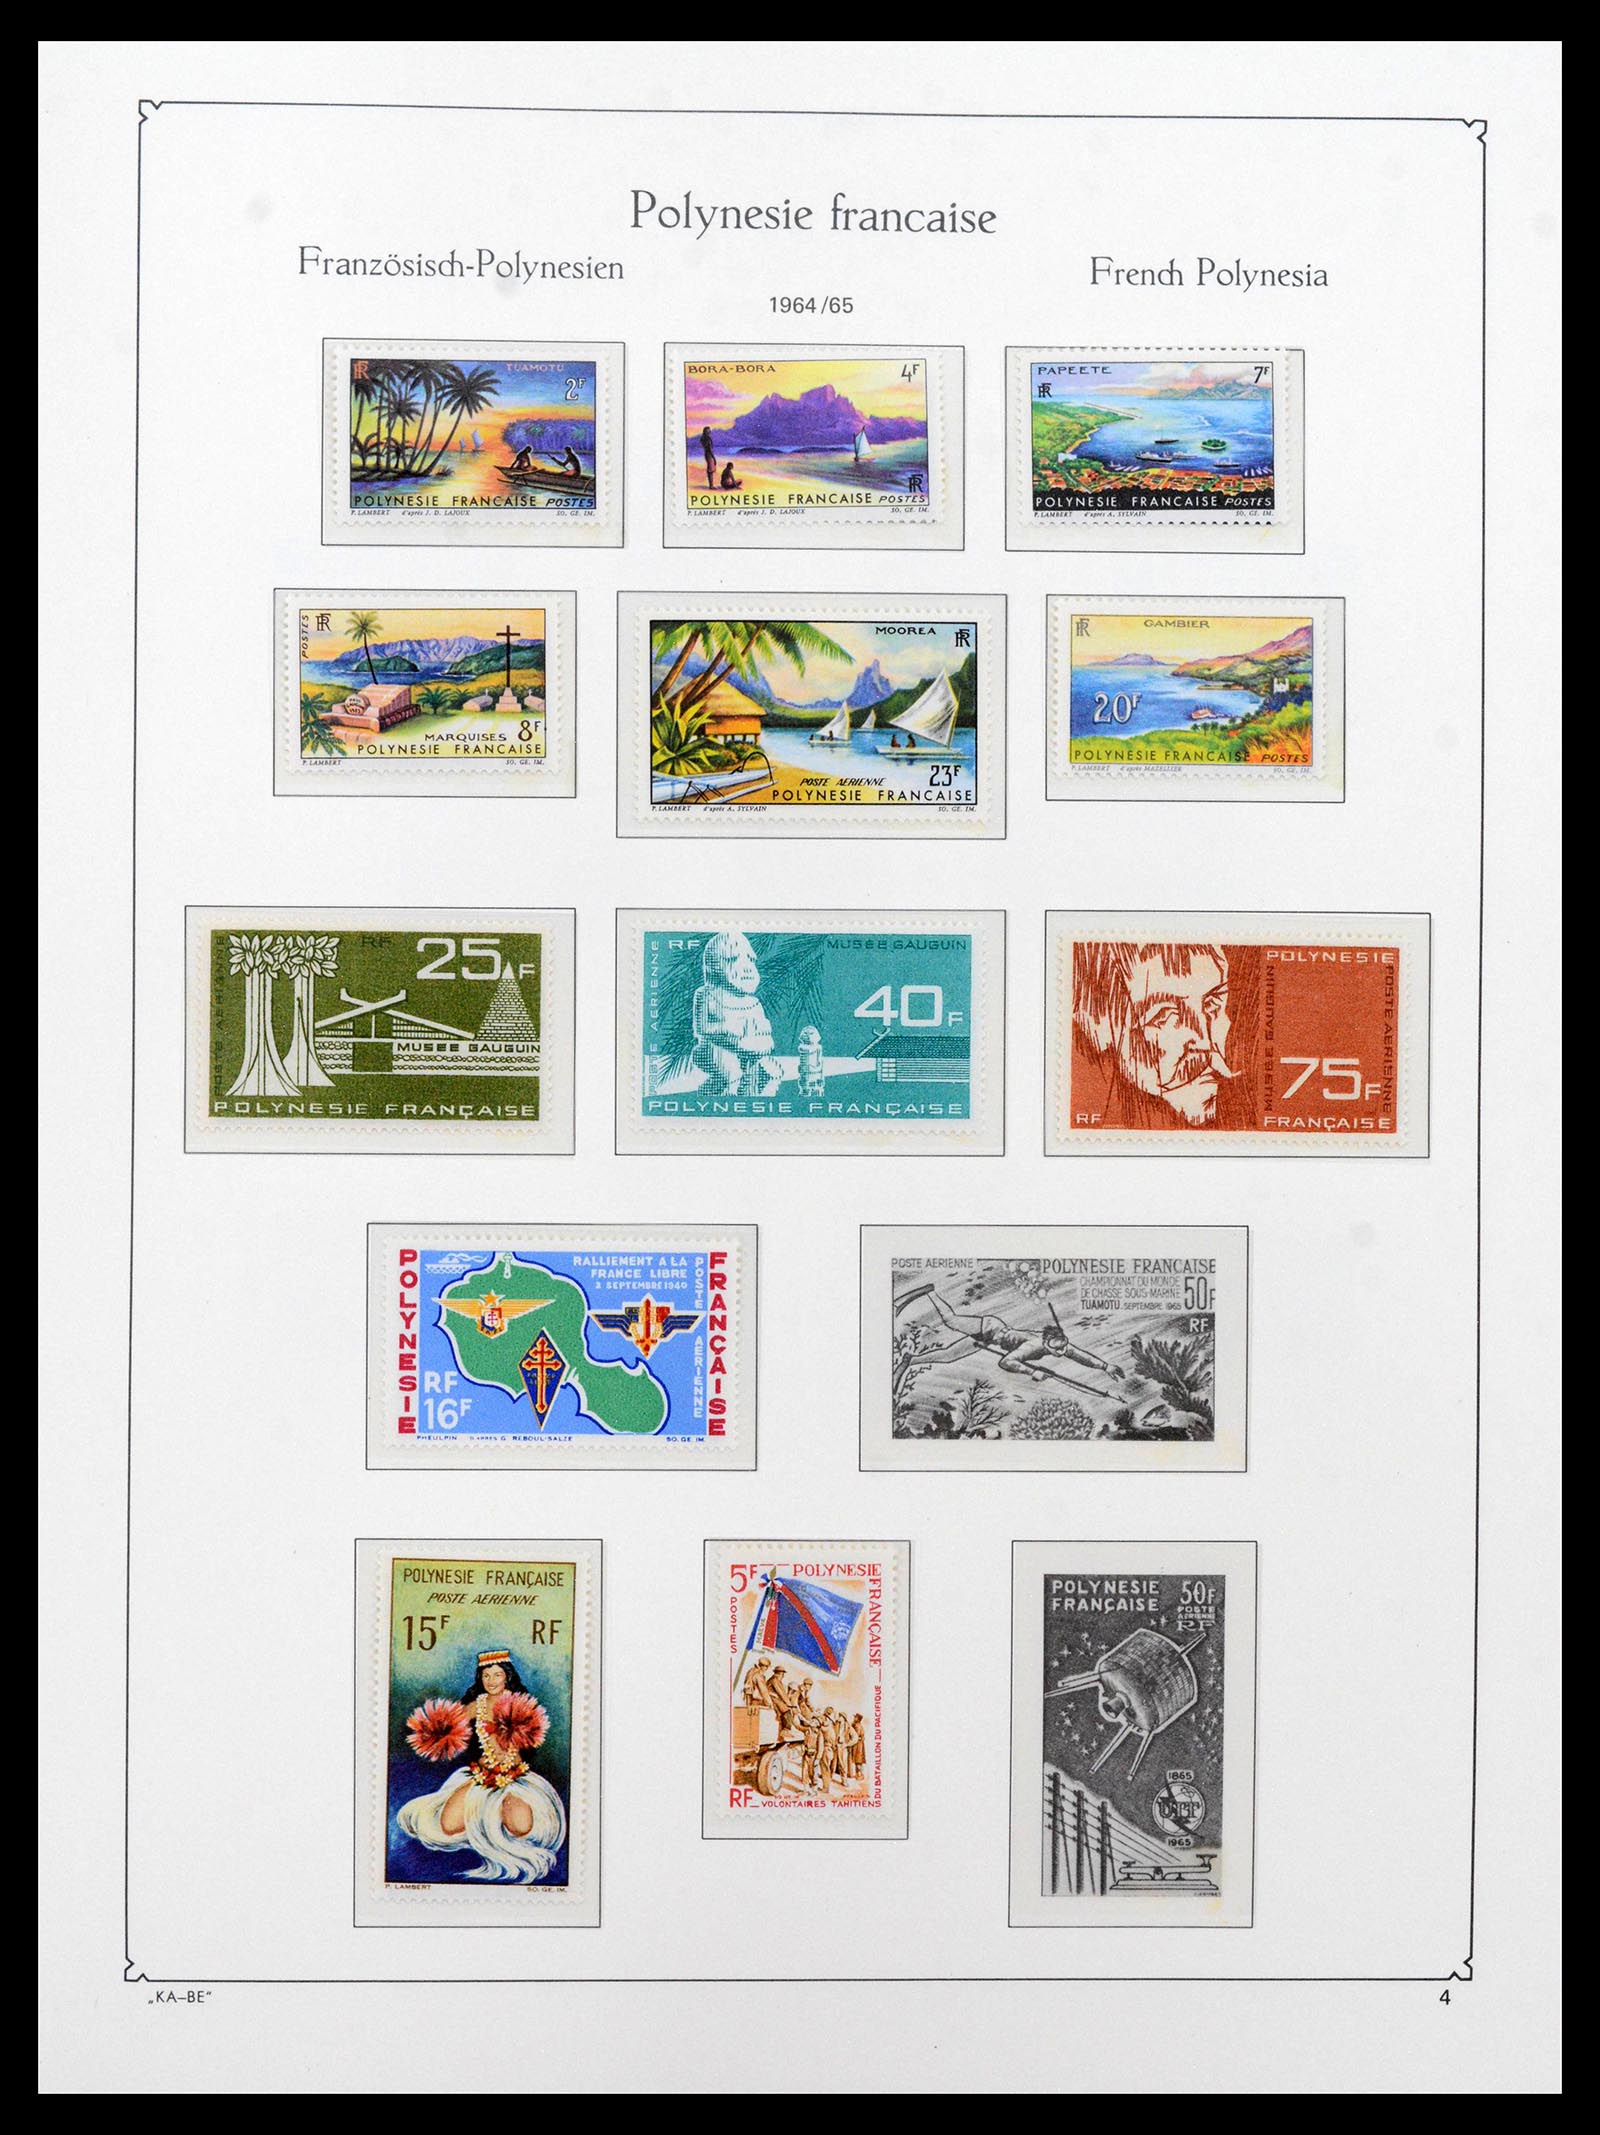 39153 0004 - Stamp collection 39153 Polynesia 1958-1990.